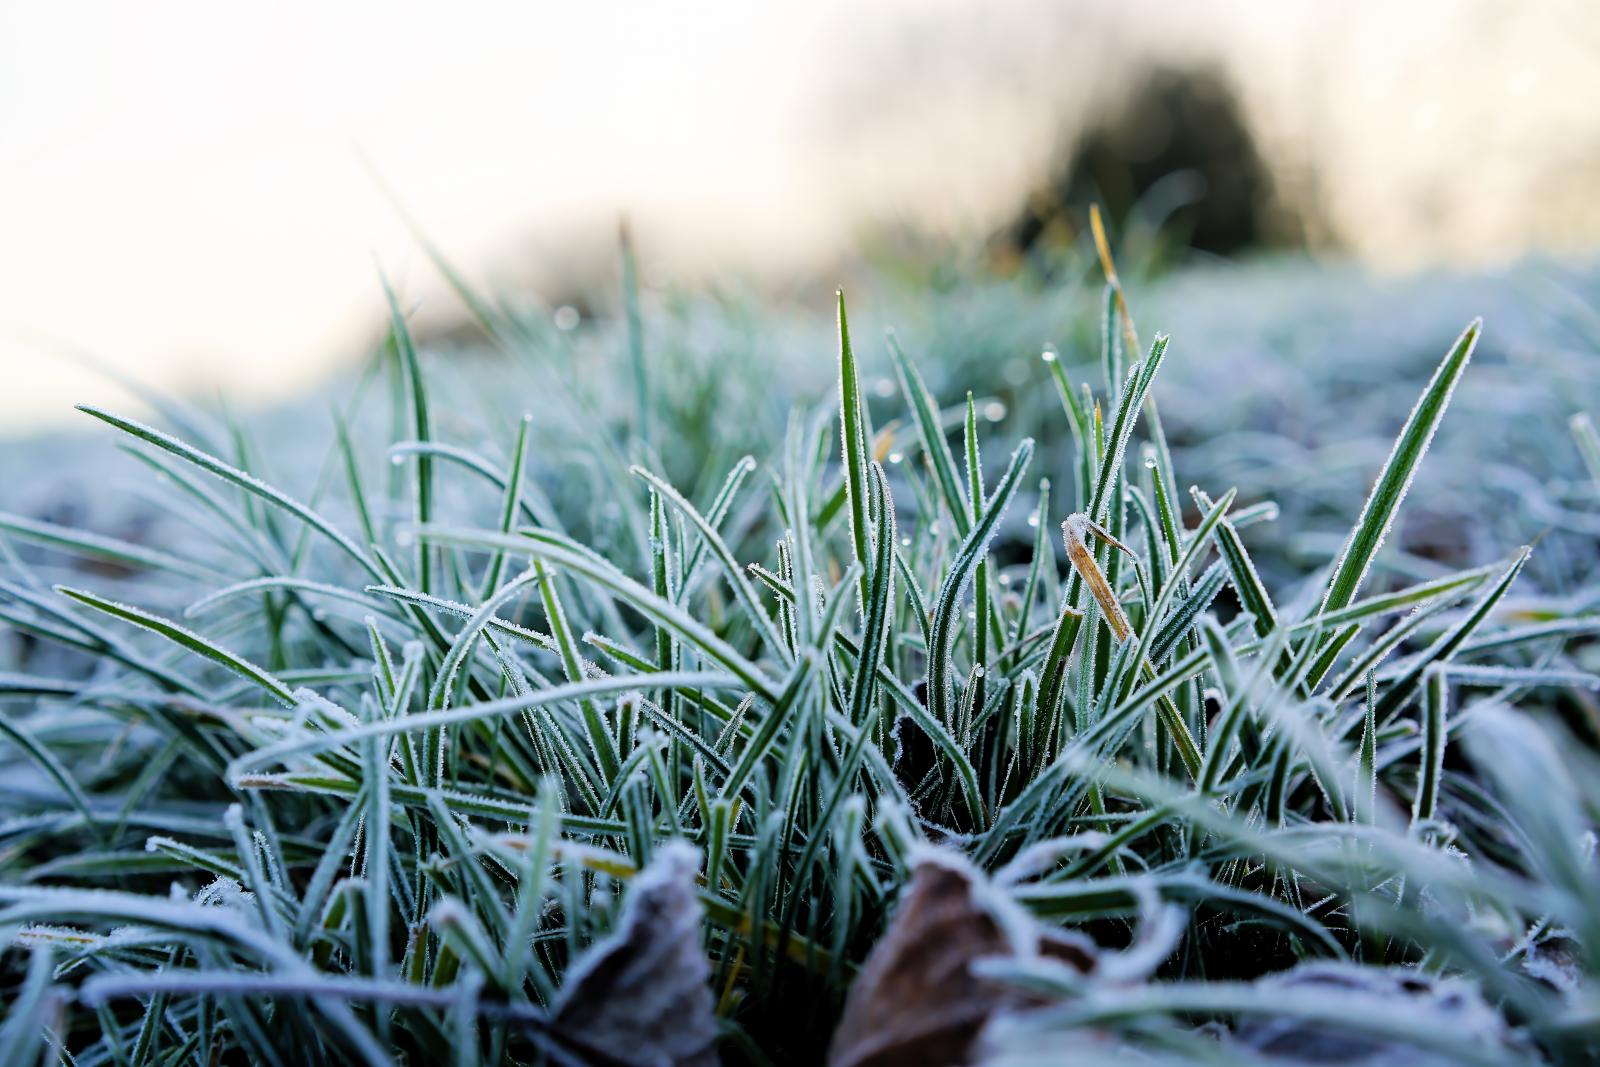 Avoid walking on frosty or icy grass